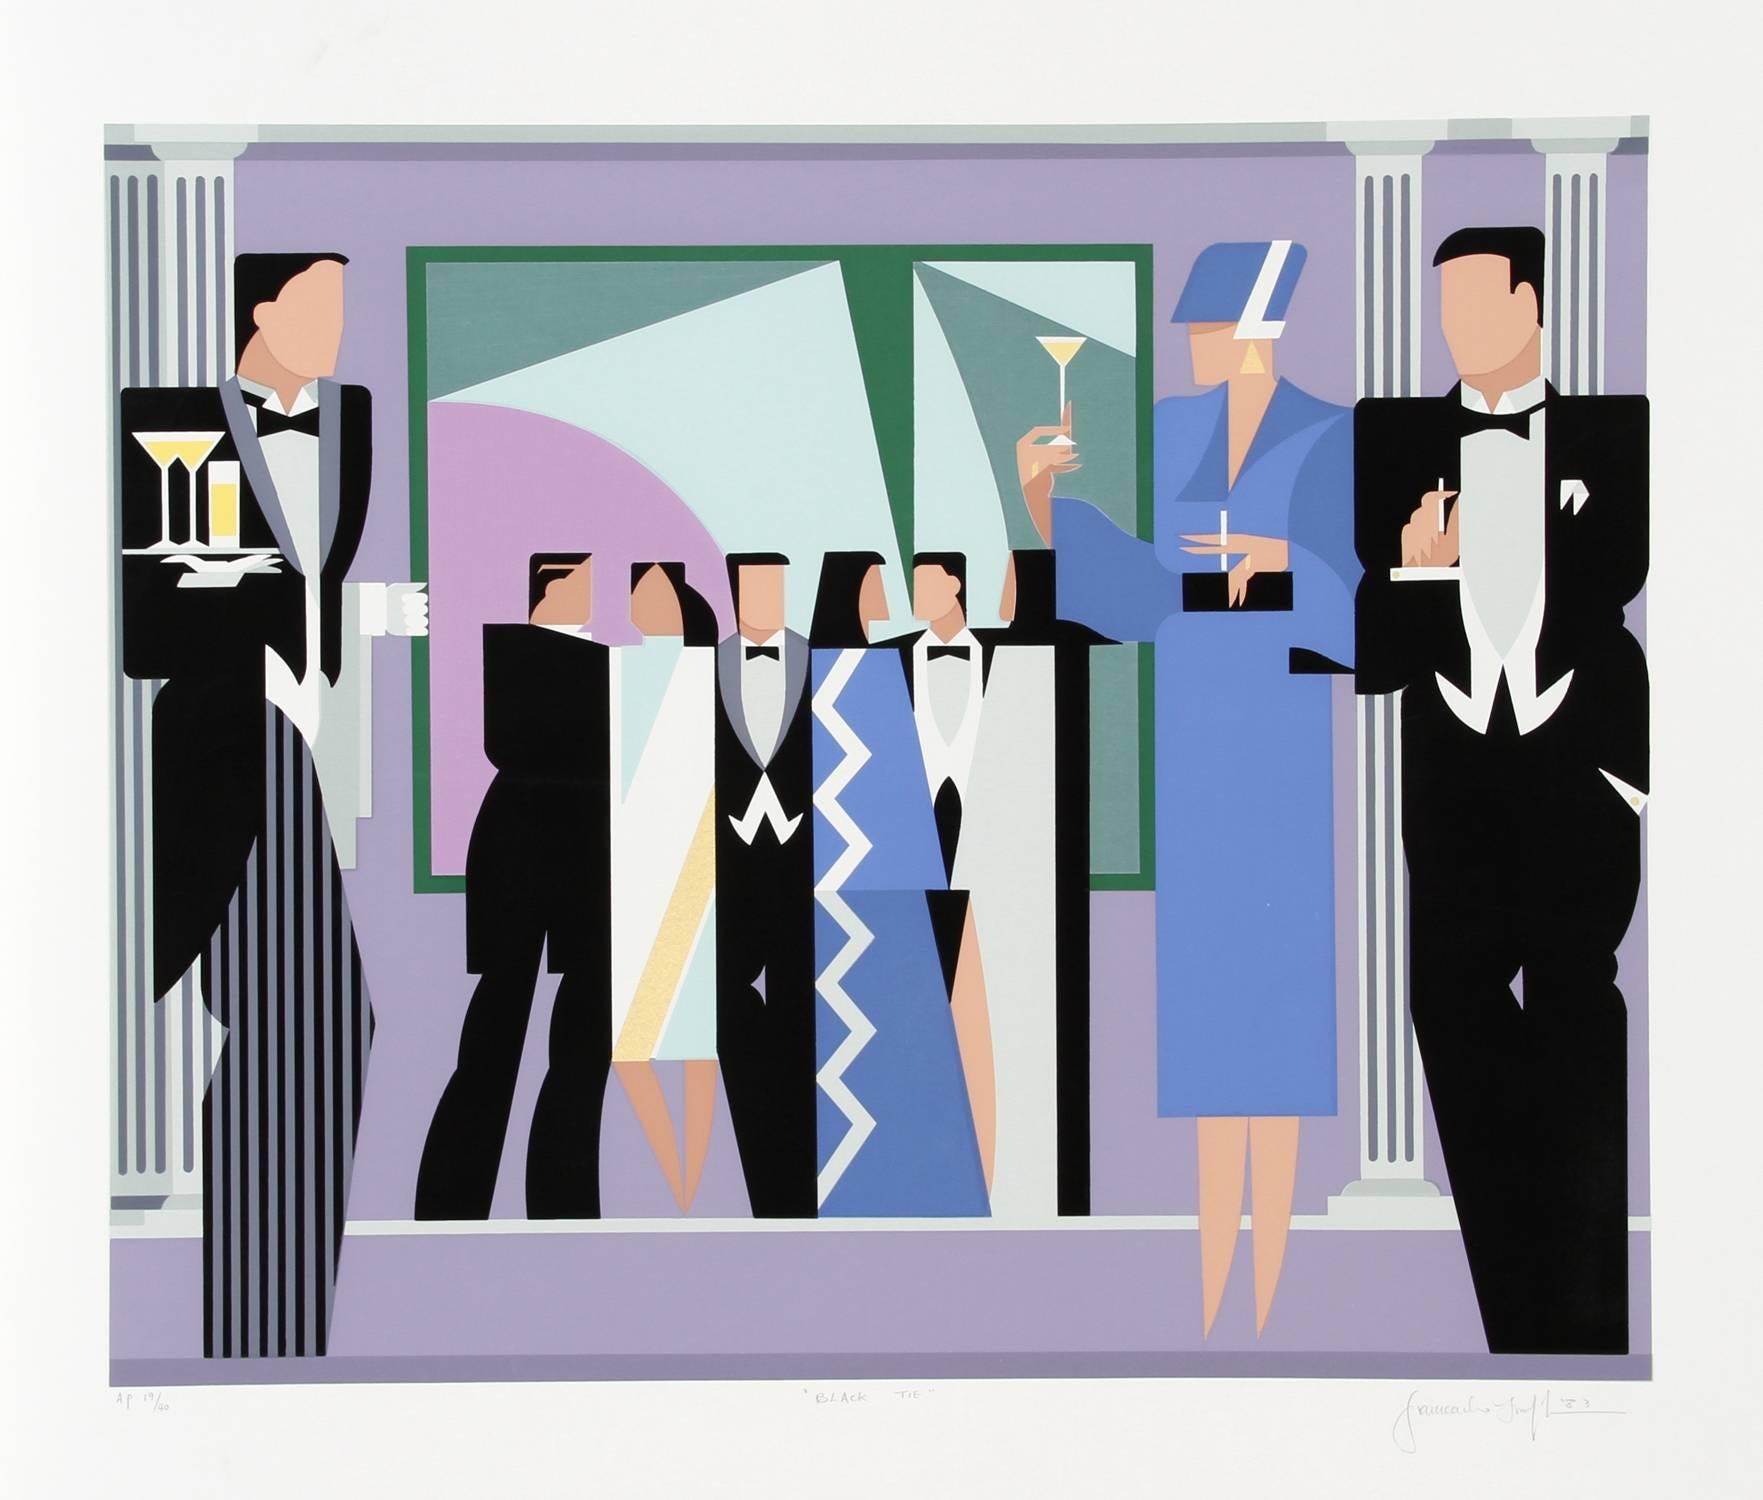 Inspired by Cubism and Futurism, Giancarlo Impiglia’s print of a black tie affair is also reminiscent of Art Deco. With the sharp lines, lean physiques, and minimalistic approach to the interior space, the artist idealizes formal evening gatherings